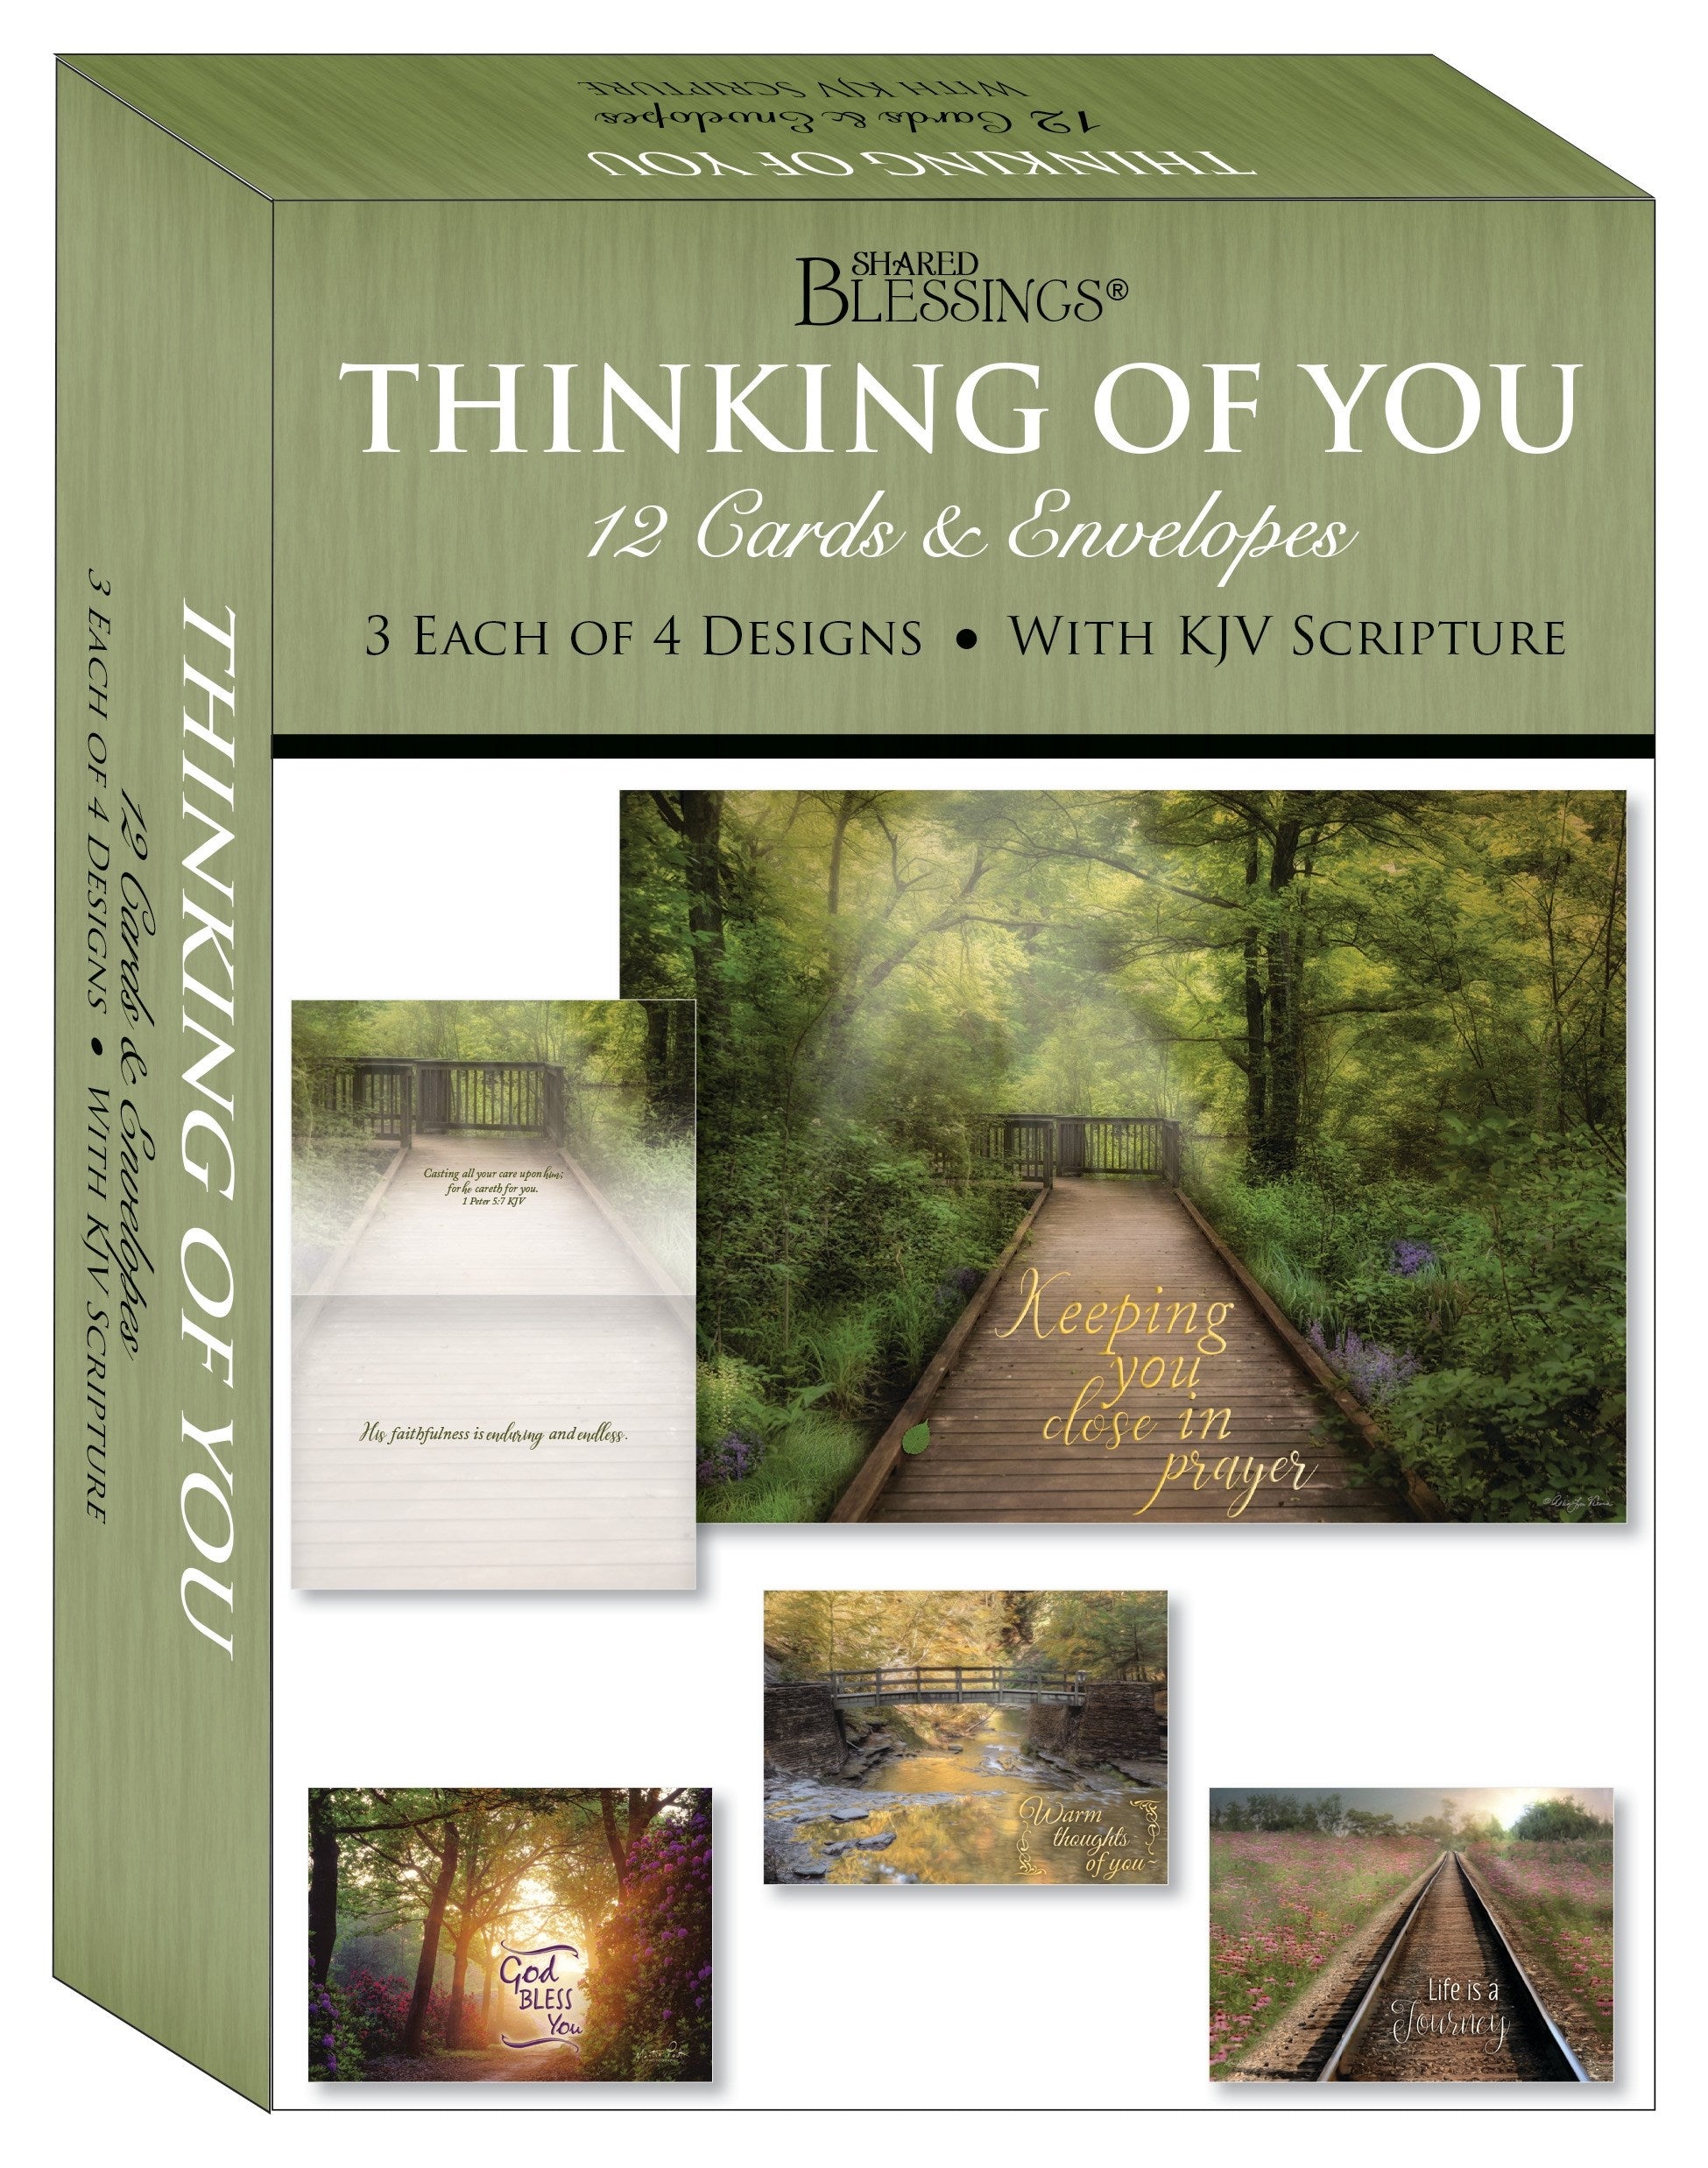 Seed of Abraham Christian Bookstore - (In)Courage - Card-Boxed-Shared Blessings-Thinking Of You Peaceful Paths (Box Of 12)